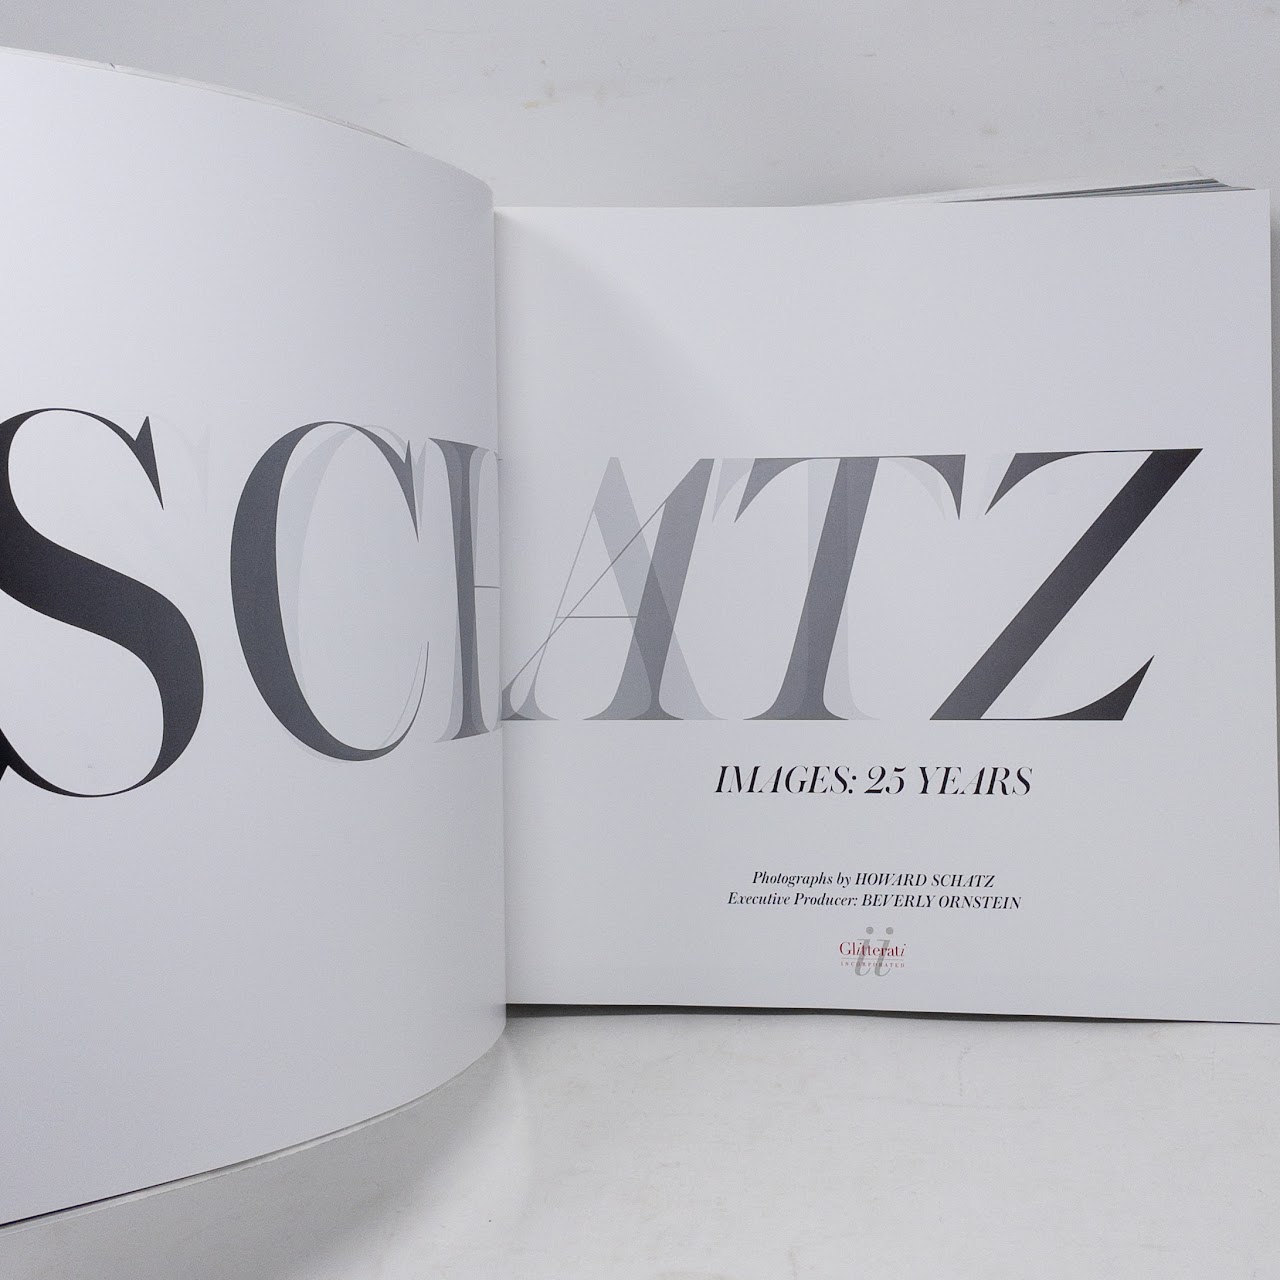 Schatz Images: 25 Years Two Book Set